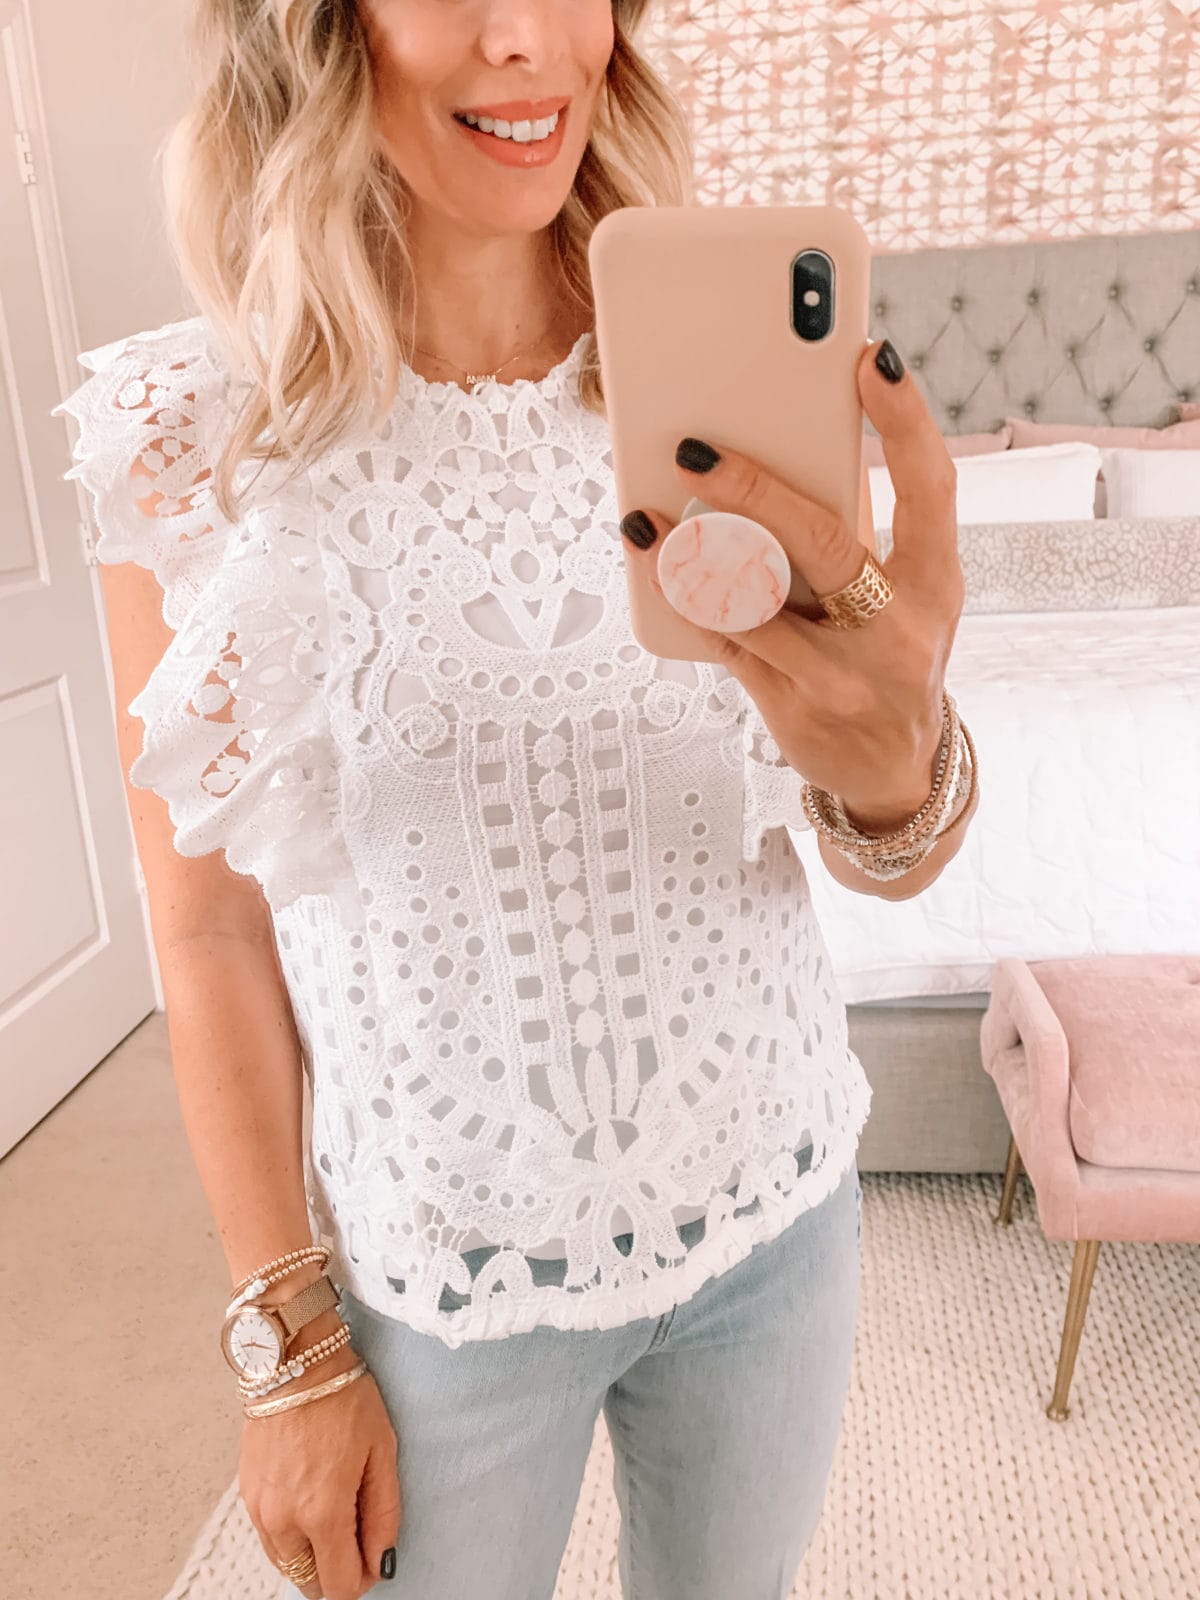 Dressing Room Finds Express, Lace Top, Jeans 